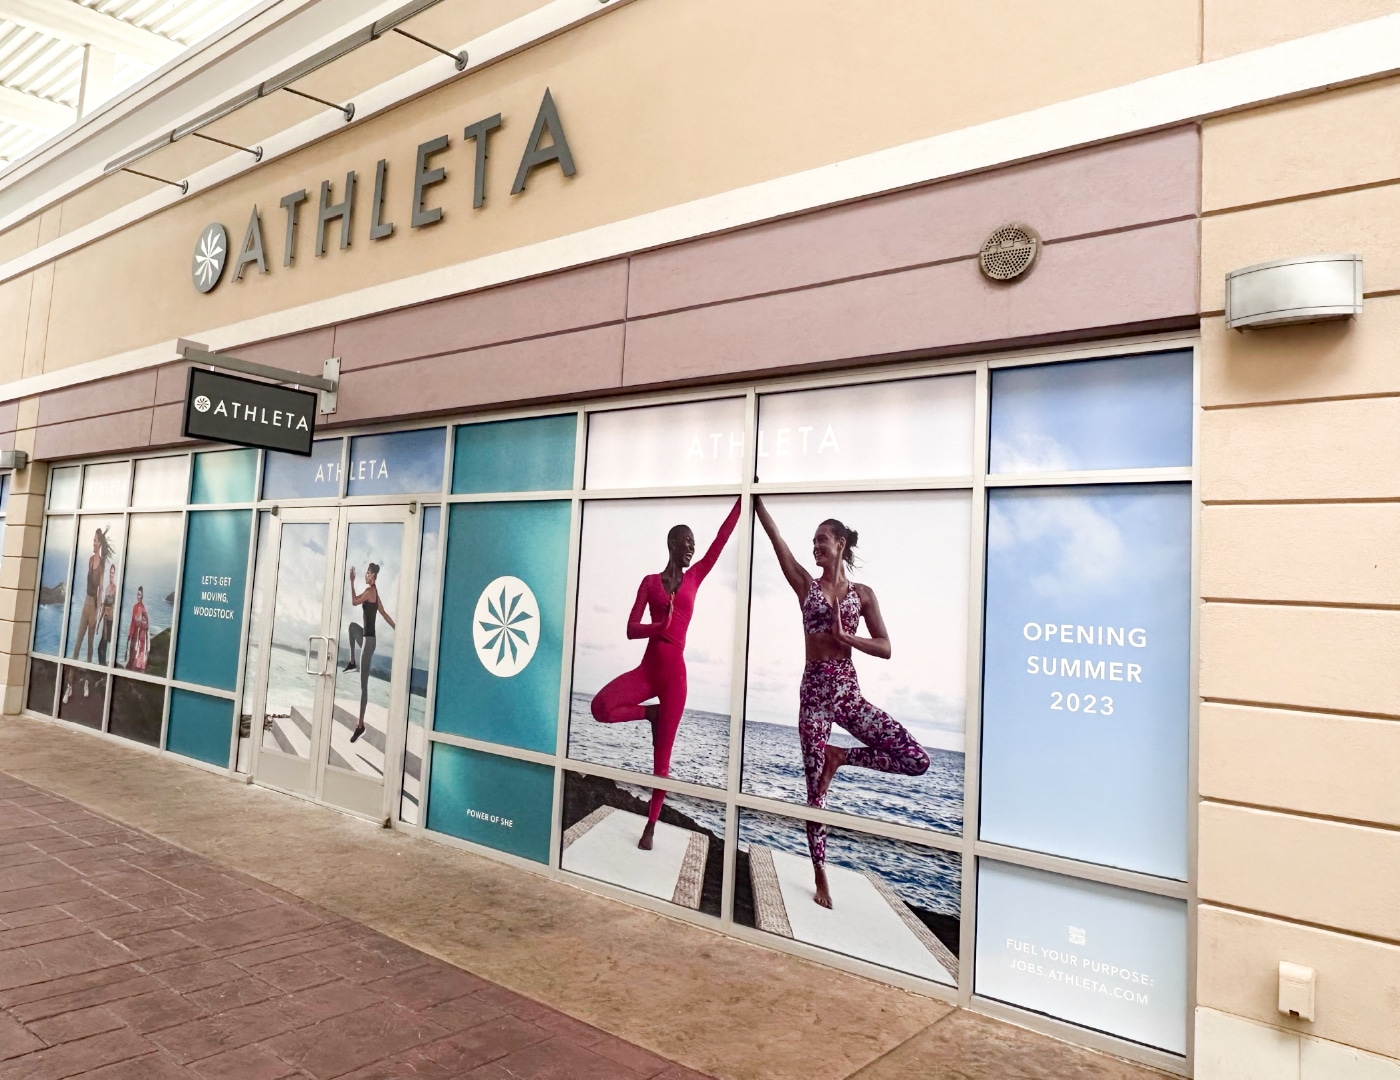 Athleta to open this summer at The Outlet Shoppes at Atlanta